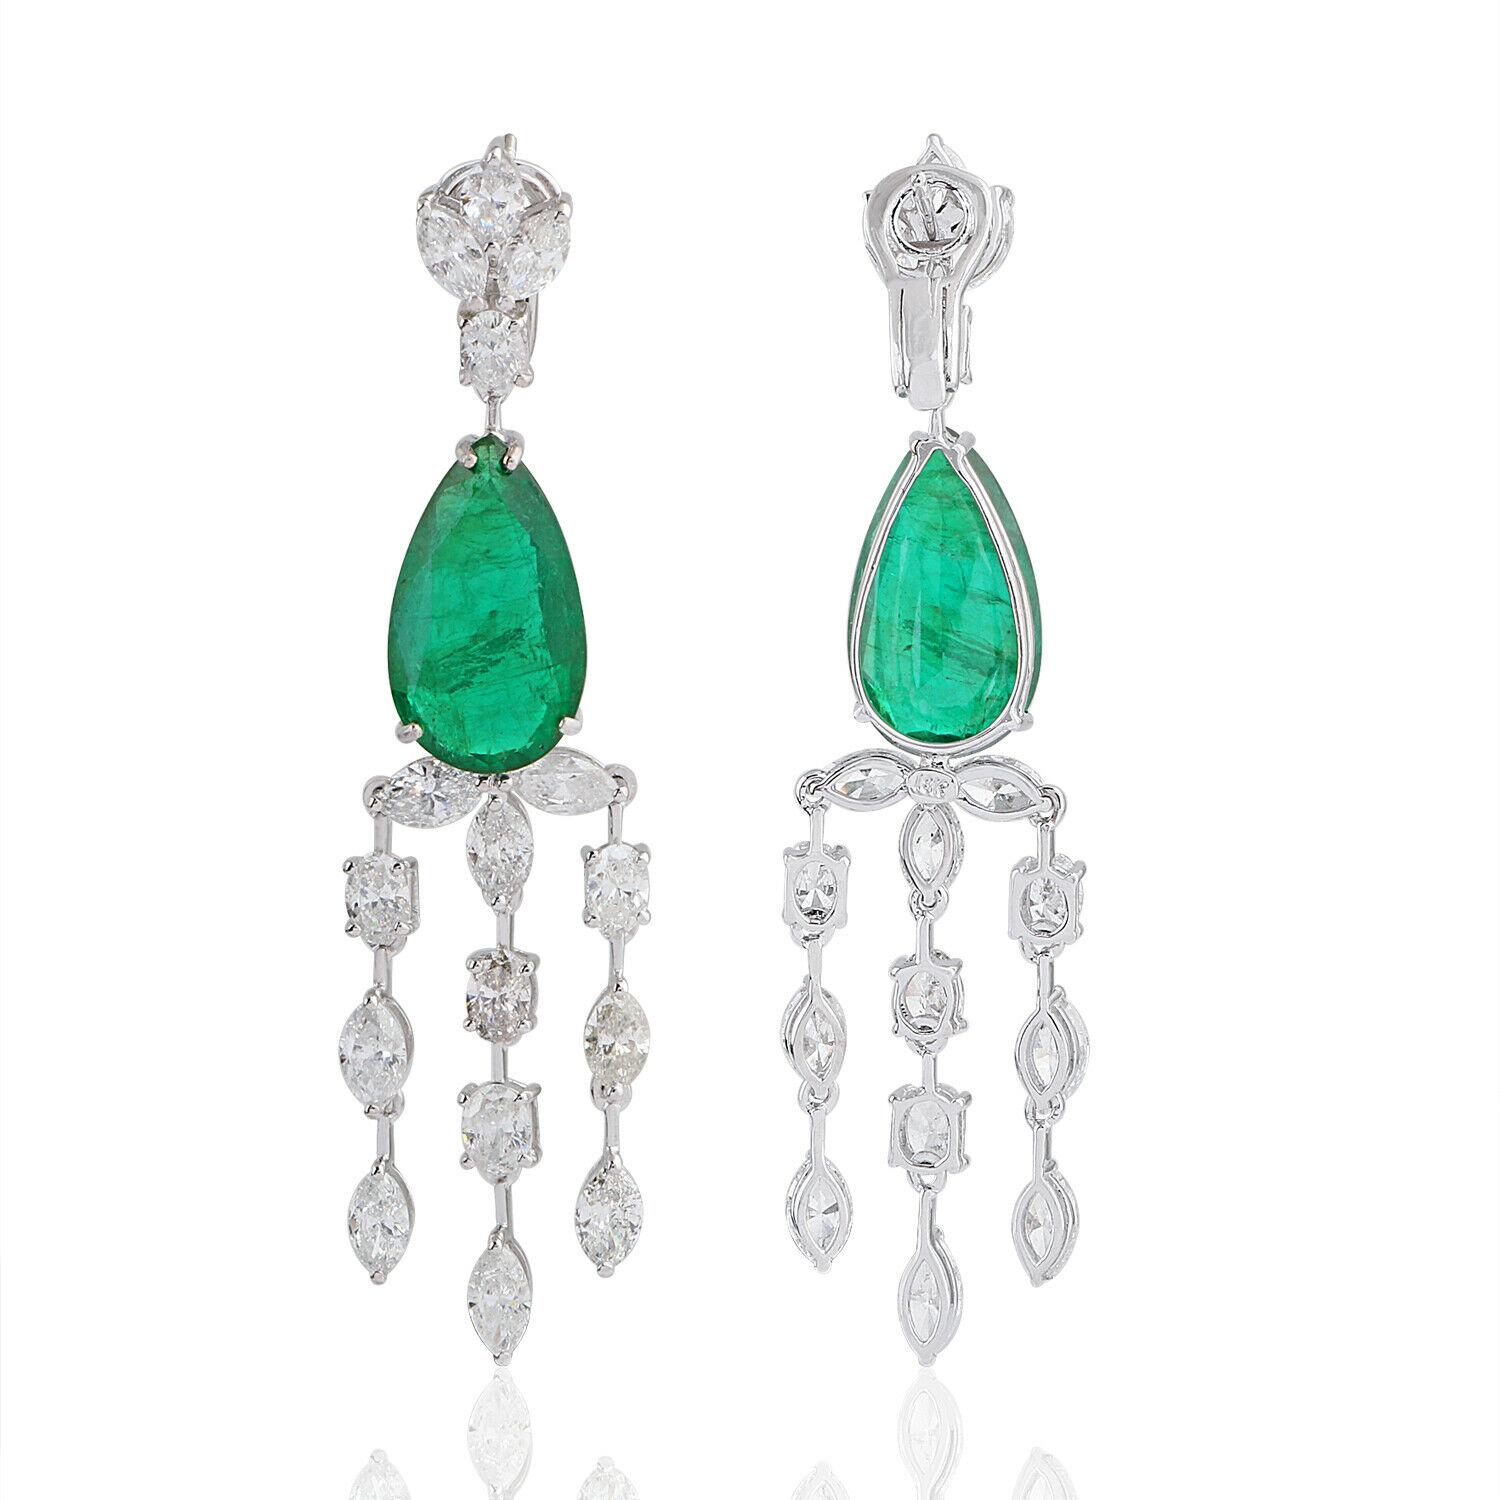 These exquisite earrings are handcrafted in 18-karat gold. It is set in 13.70 carats emerald and 10.60 carats of sparkling diamonds.

FOLLOW MEGHNA JEWELS storefront to view the latest collection & exclusive pieces. Meghna Jewels is proudly rated as